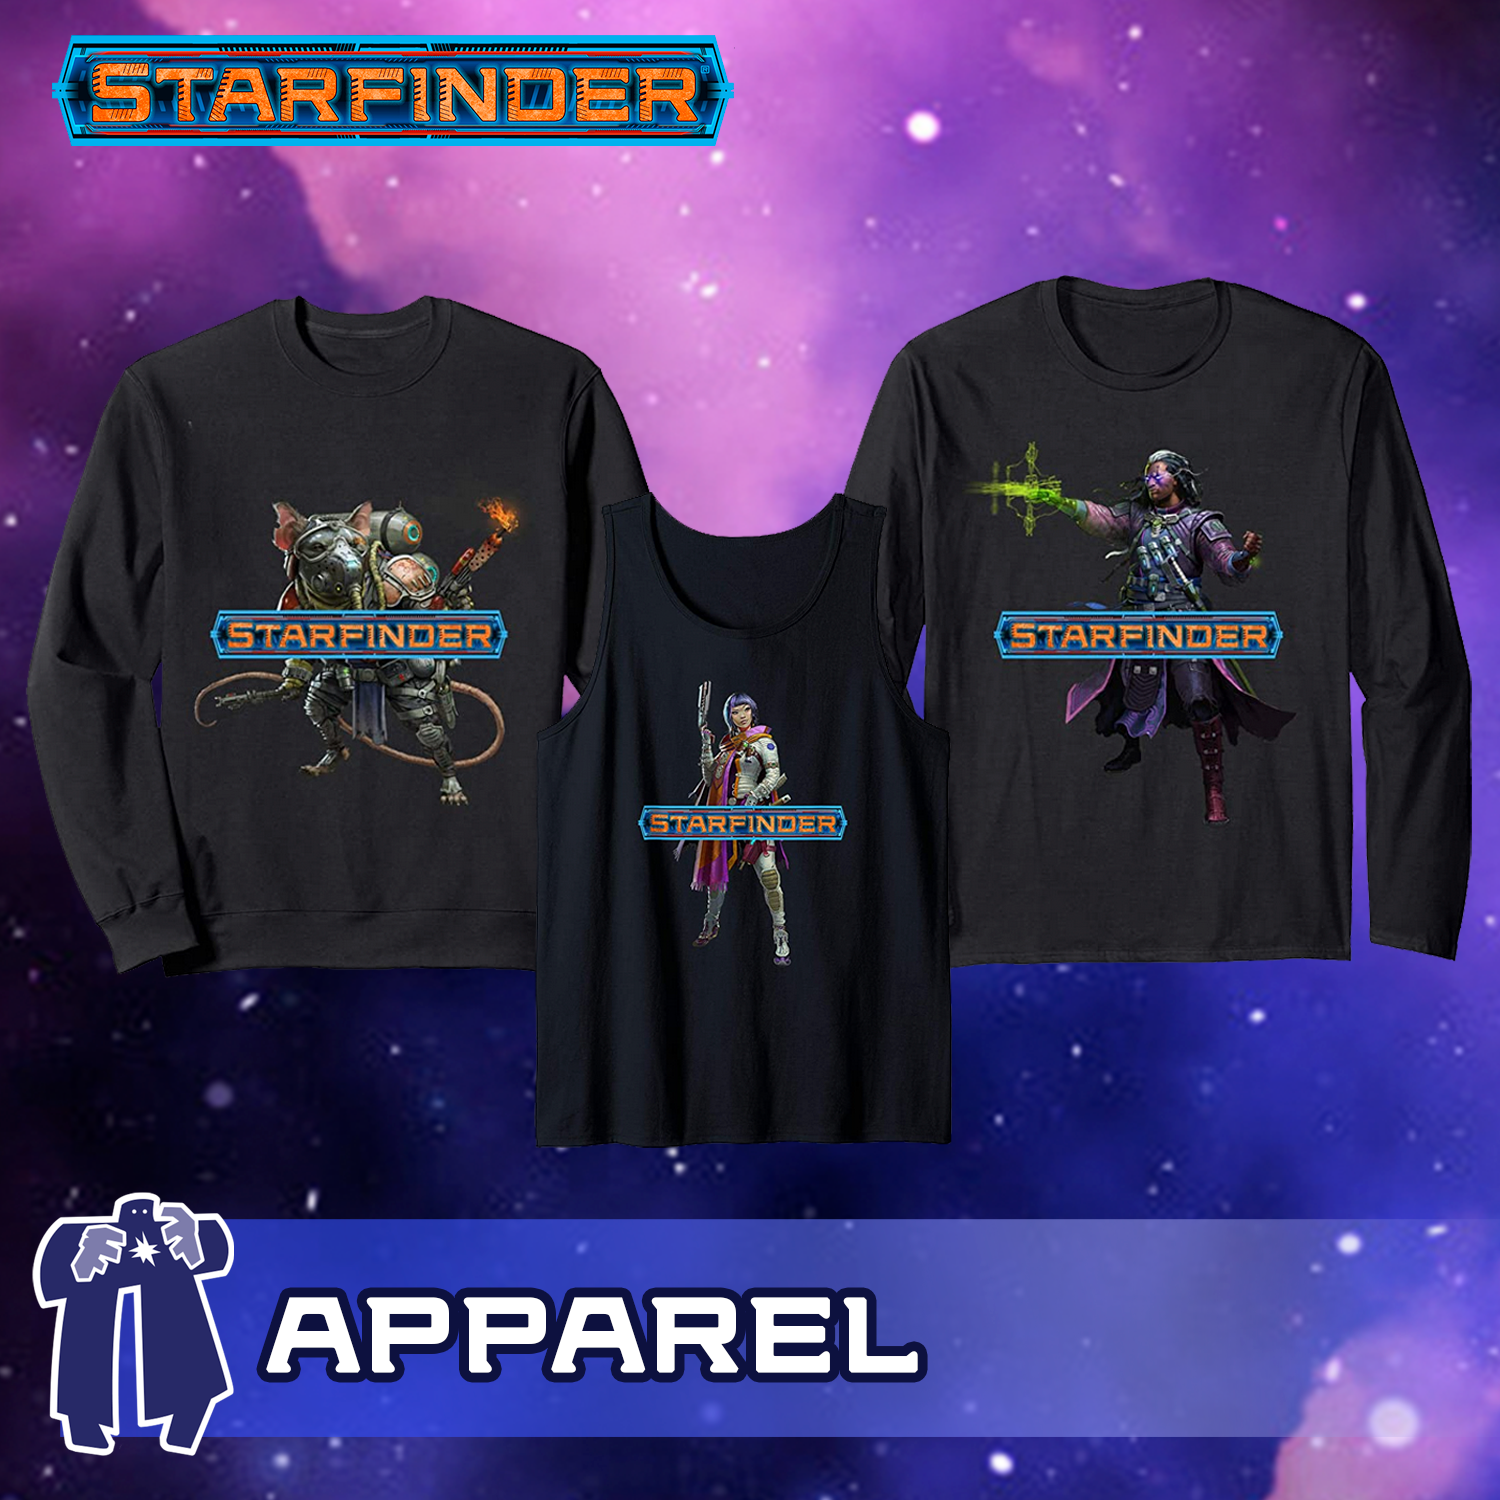 Images showing the Starfinder apparel available via Amazon.